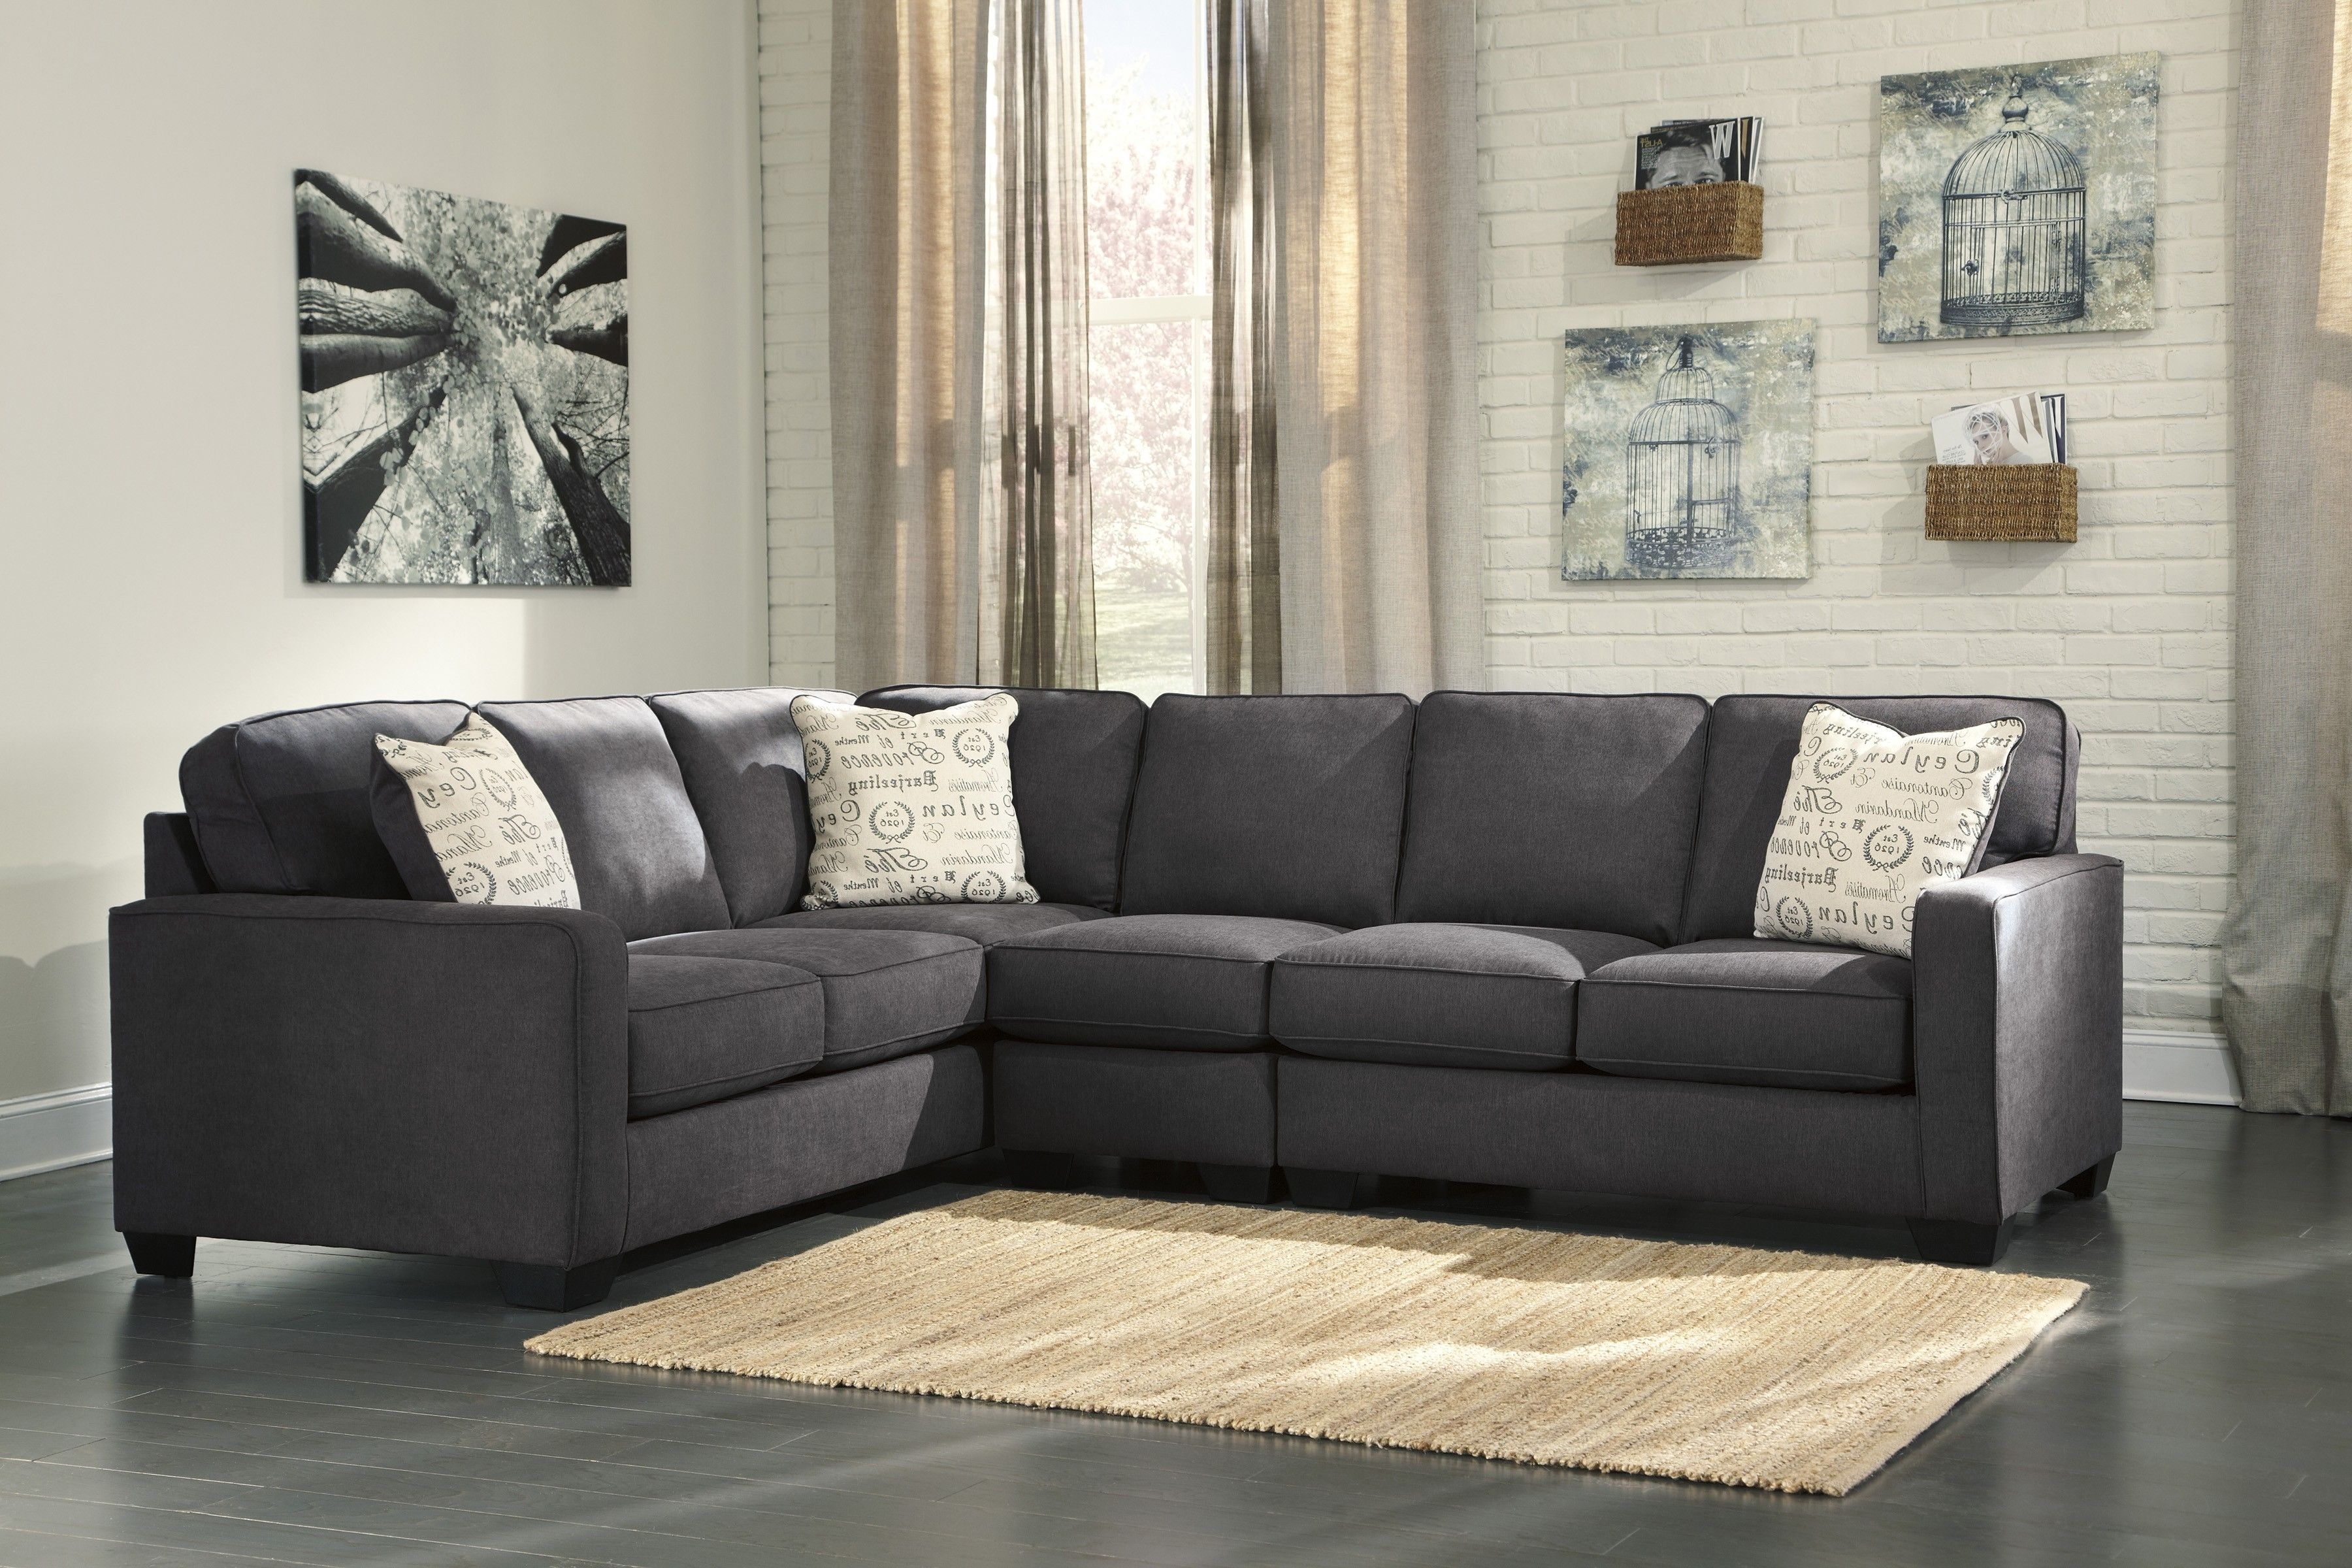 Alenya Charcoal 3 Piece Sectional Sofa For $770.00 – Furnitureusa In Elk Grove Ca Sectional Sofas (Photo 5 of 10)